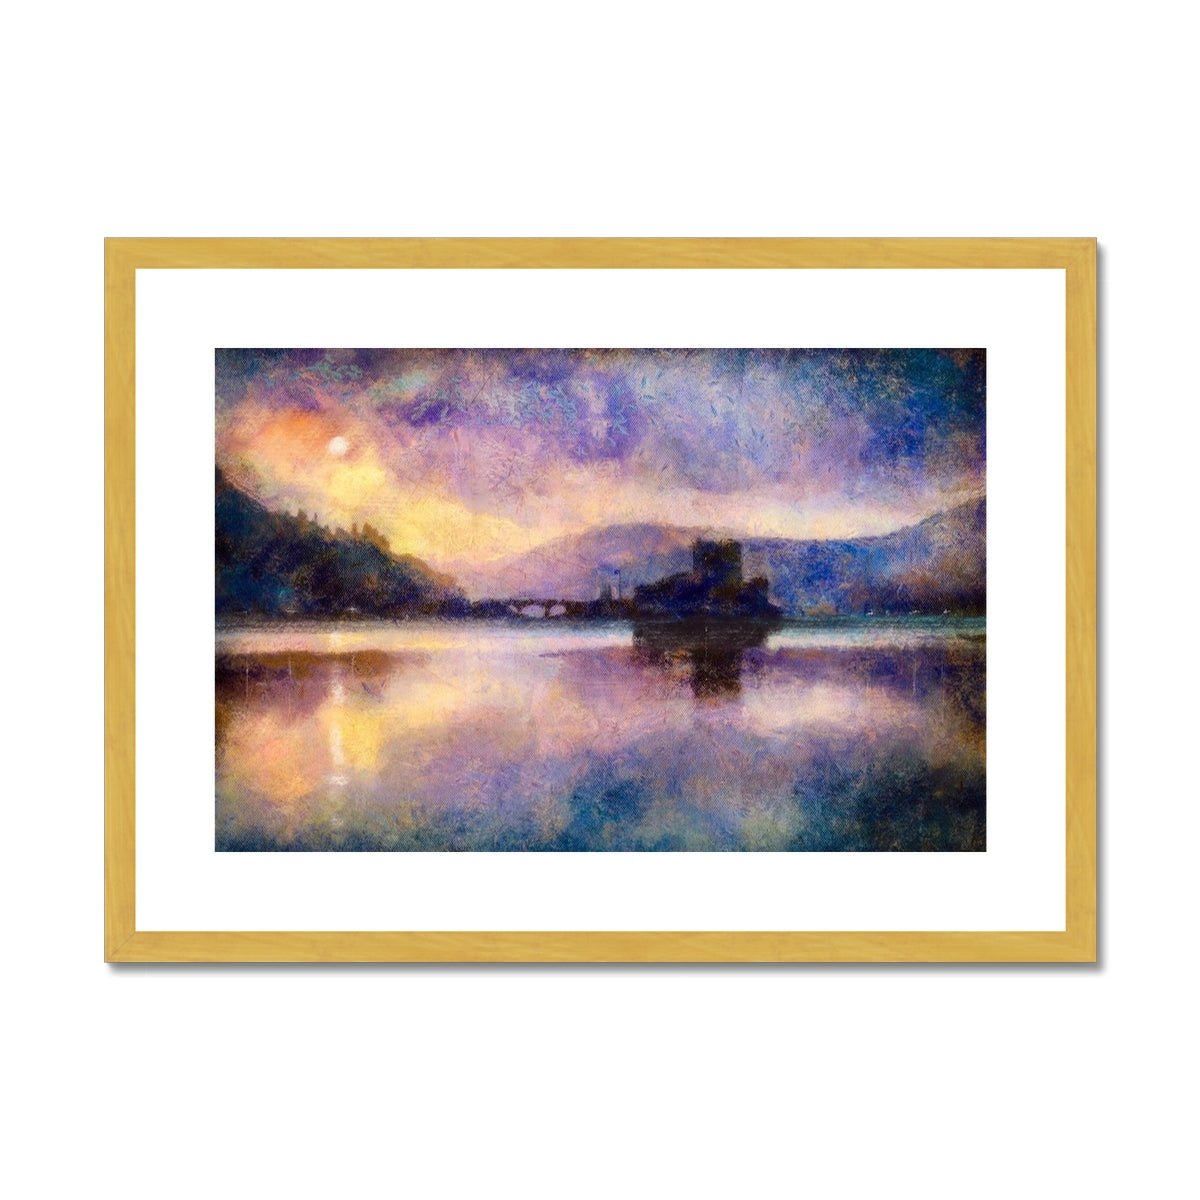 Eilean Donan Castle Moonlight Painting | Antique Framed & Mounted Prints From Scotland-Antique Framed & Mounted Prints-Scottish Castles Art Gallery-A2 Landscape-Gold Frame-Paintings, Prints, Homeware, Art Gifts From Scotland By Scottish Artist Kevin Hunter